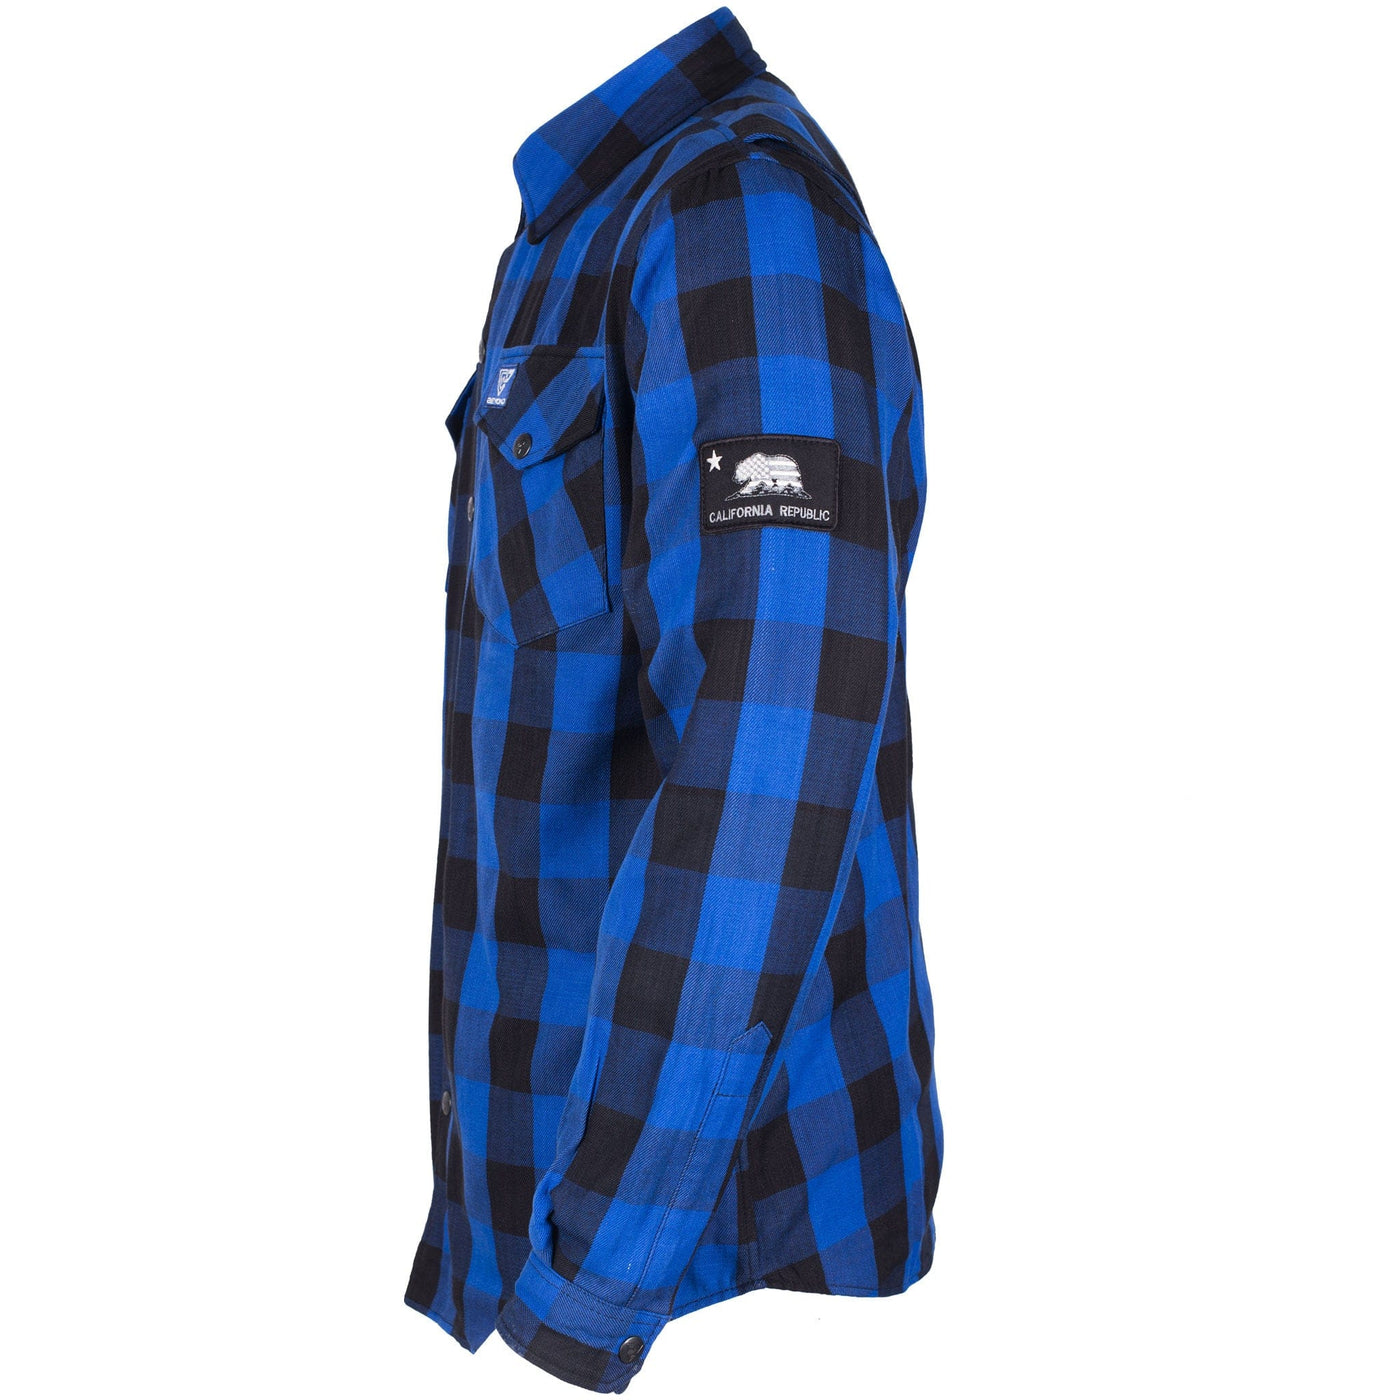 Protective Flannel Shirt with Pads - Blue Checkered